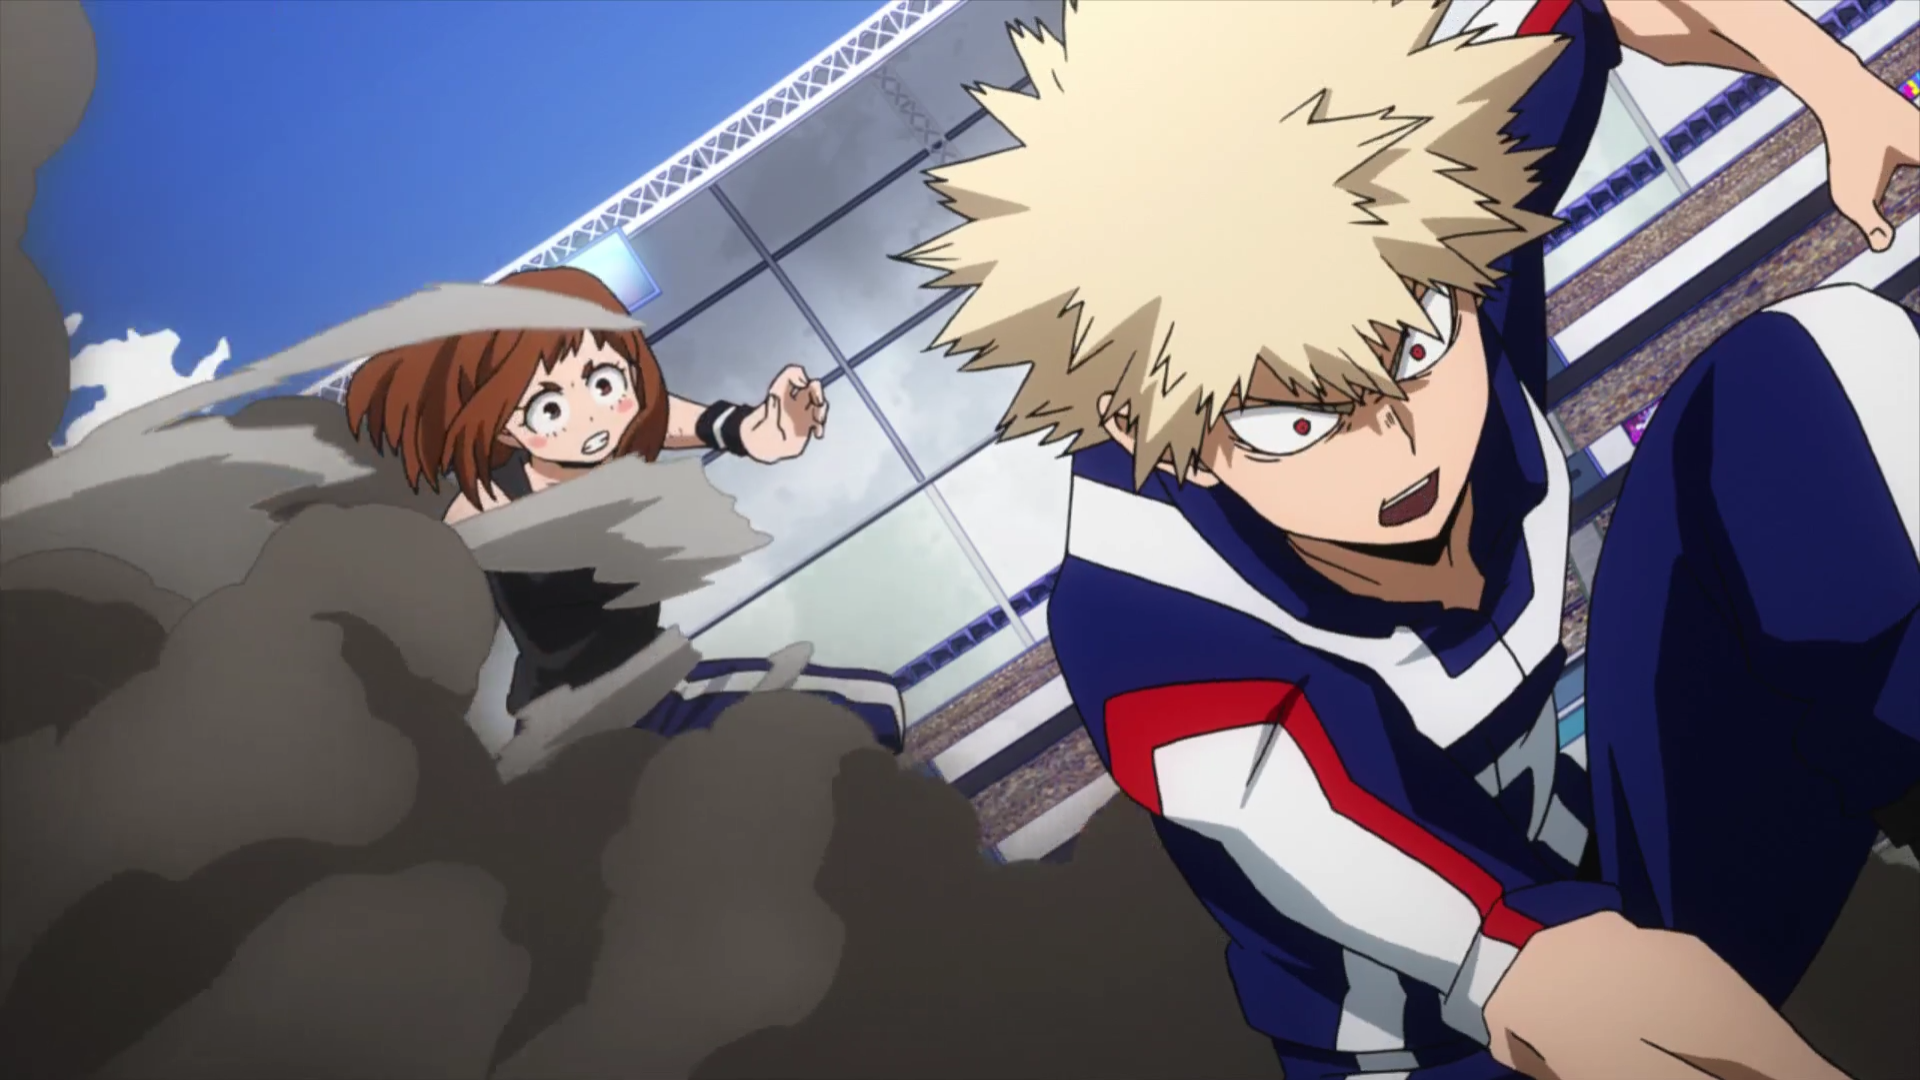 Katsuki Bakugo Isn't Being Set Up As A Villain and That's Why He's